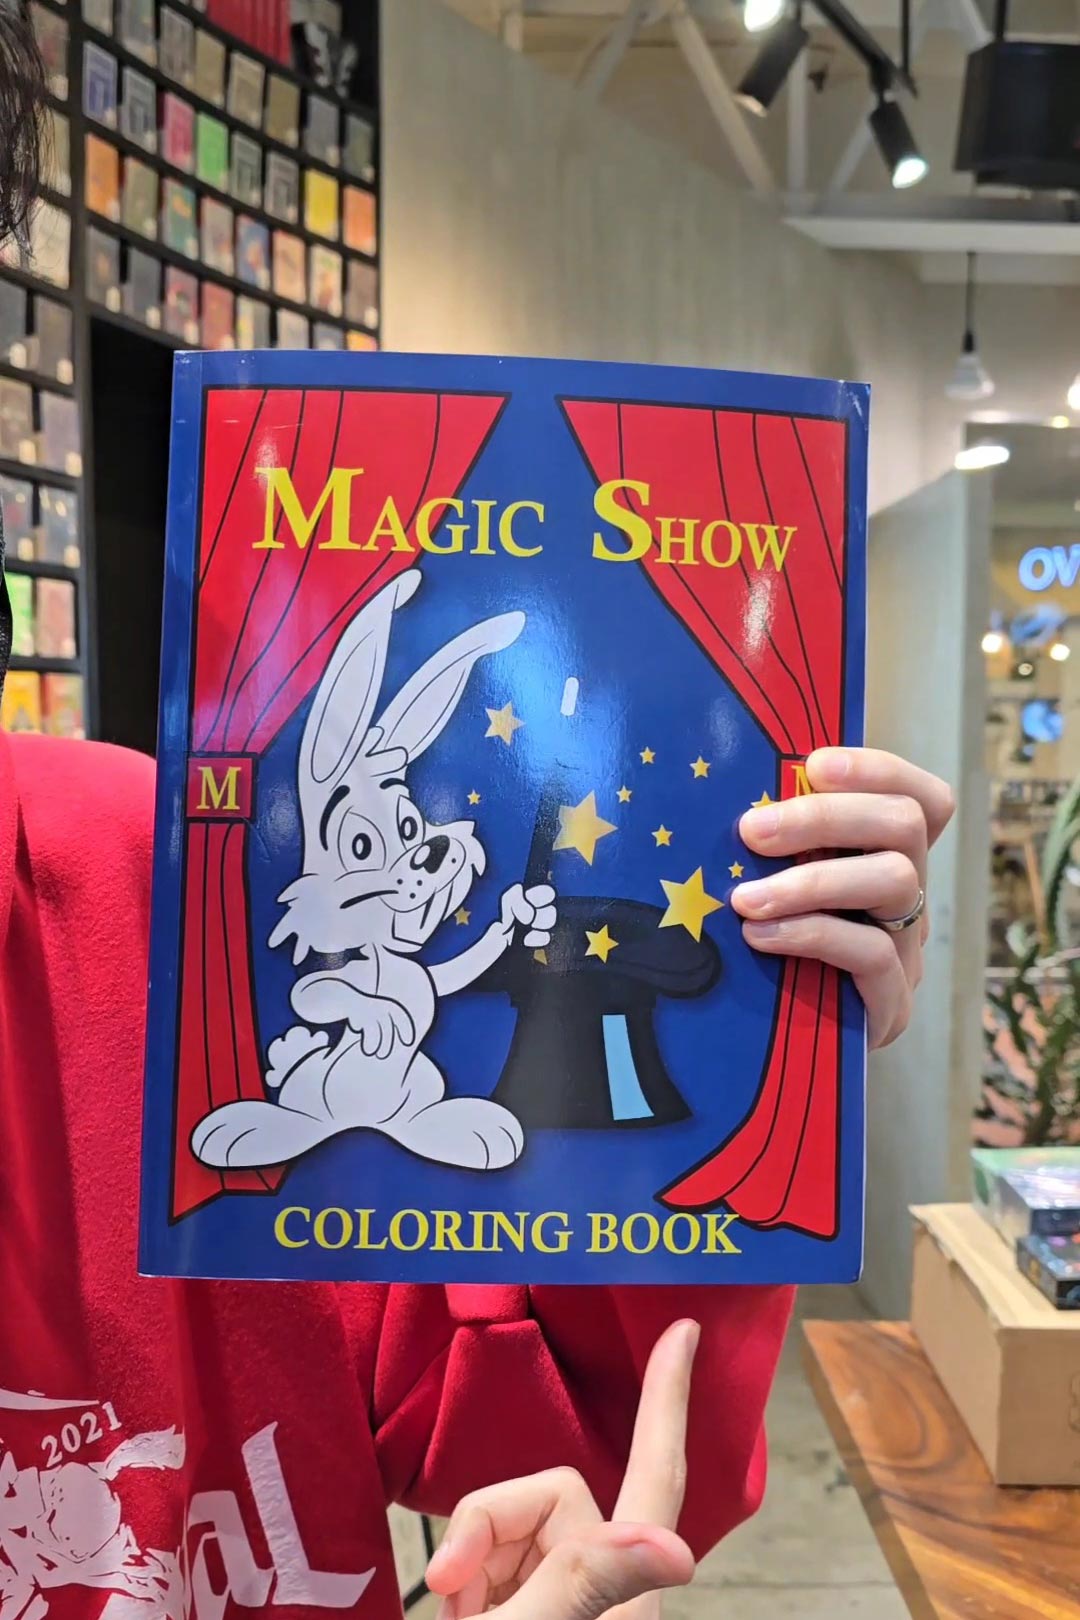 This is called the Magic Show Coloring Book